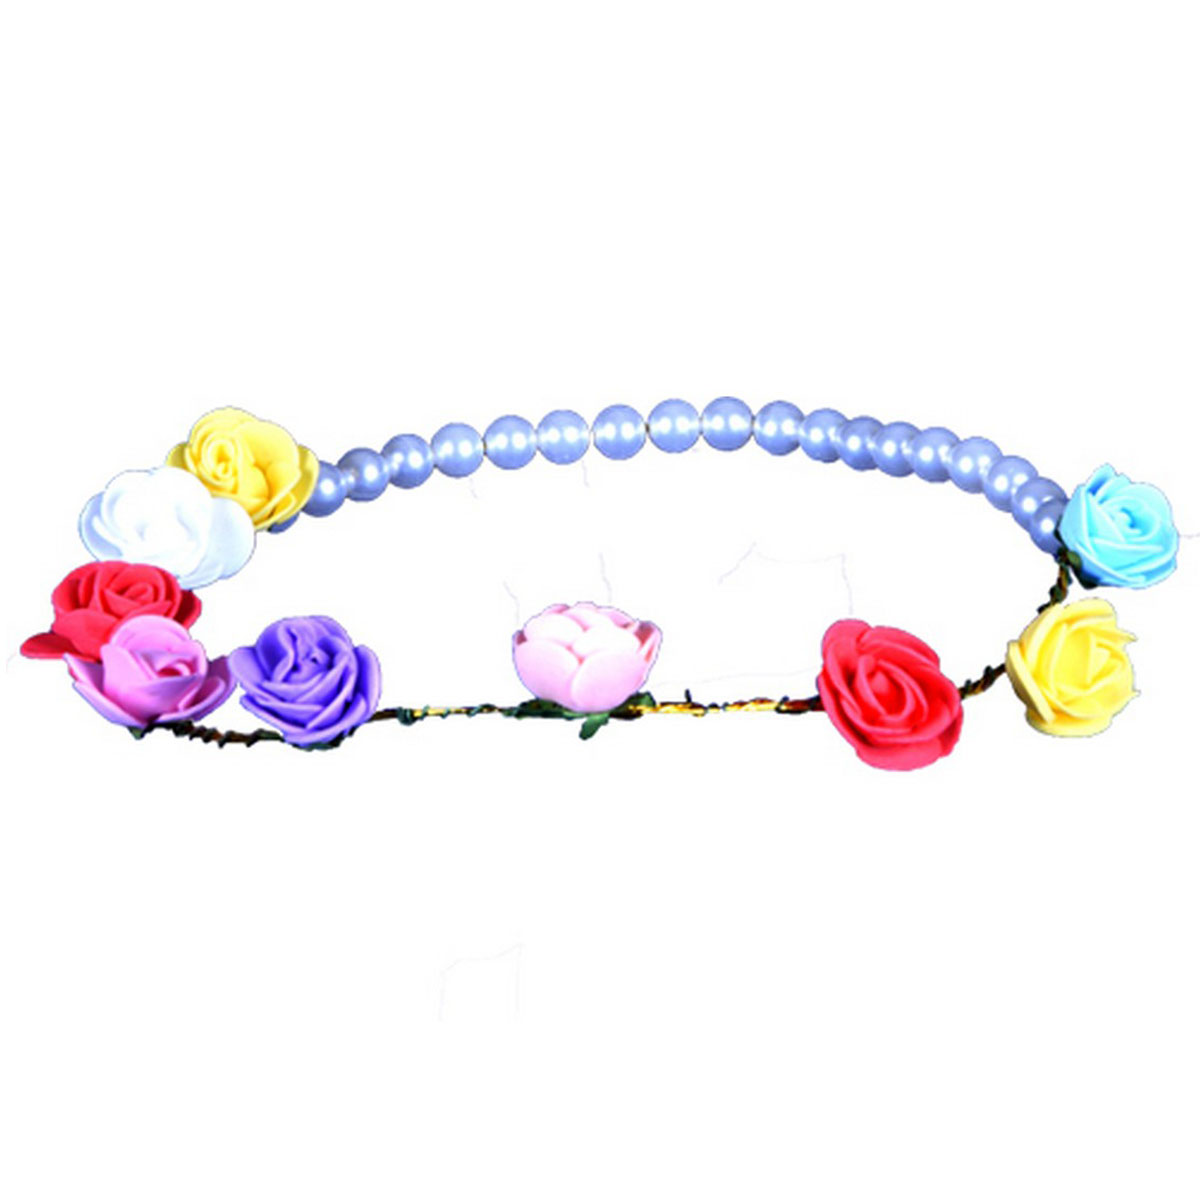 Flower Tiara With Beads - Multi Color